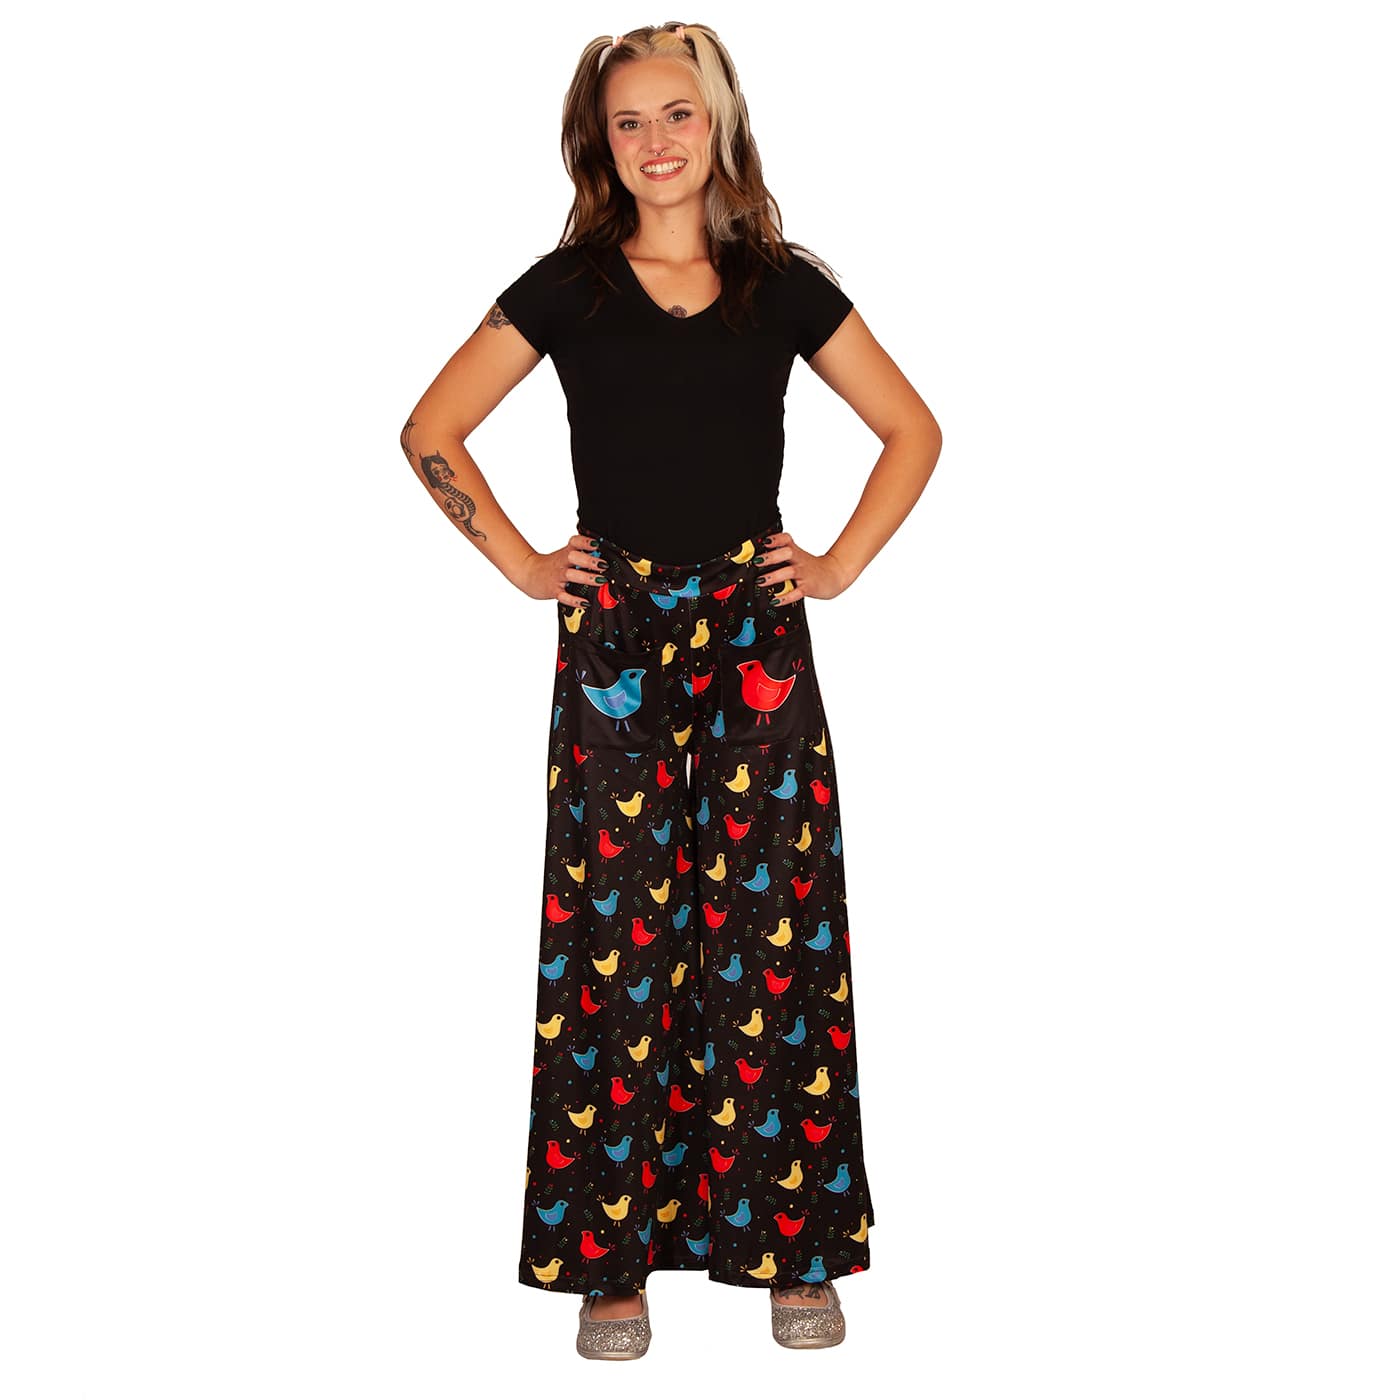 Chirp Wide Leg Pants by RainbowsAndFairies.com.au (Cute Birds - Partridge Family Inspired - Pants With Pockets - Pallazo Pants - Flares) - SKU: CL_WIDEL_CHIRP_ORG - Pic-02